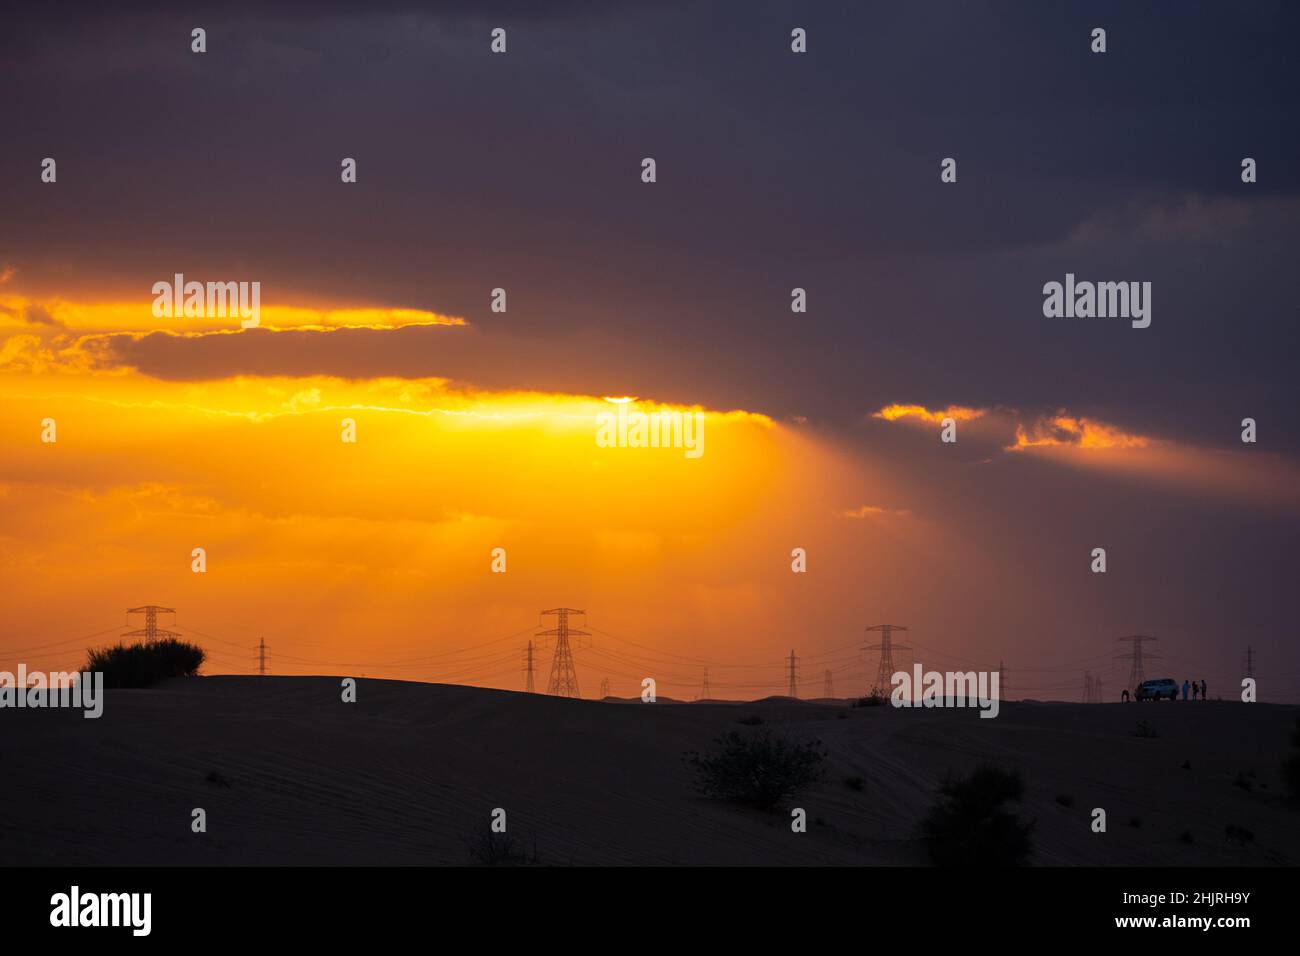 Dramatic desert sunset, sun is coming out from dark clouds, with power line in the background, Dubai, UAE Stock Photo